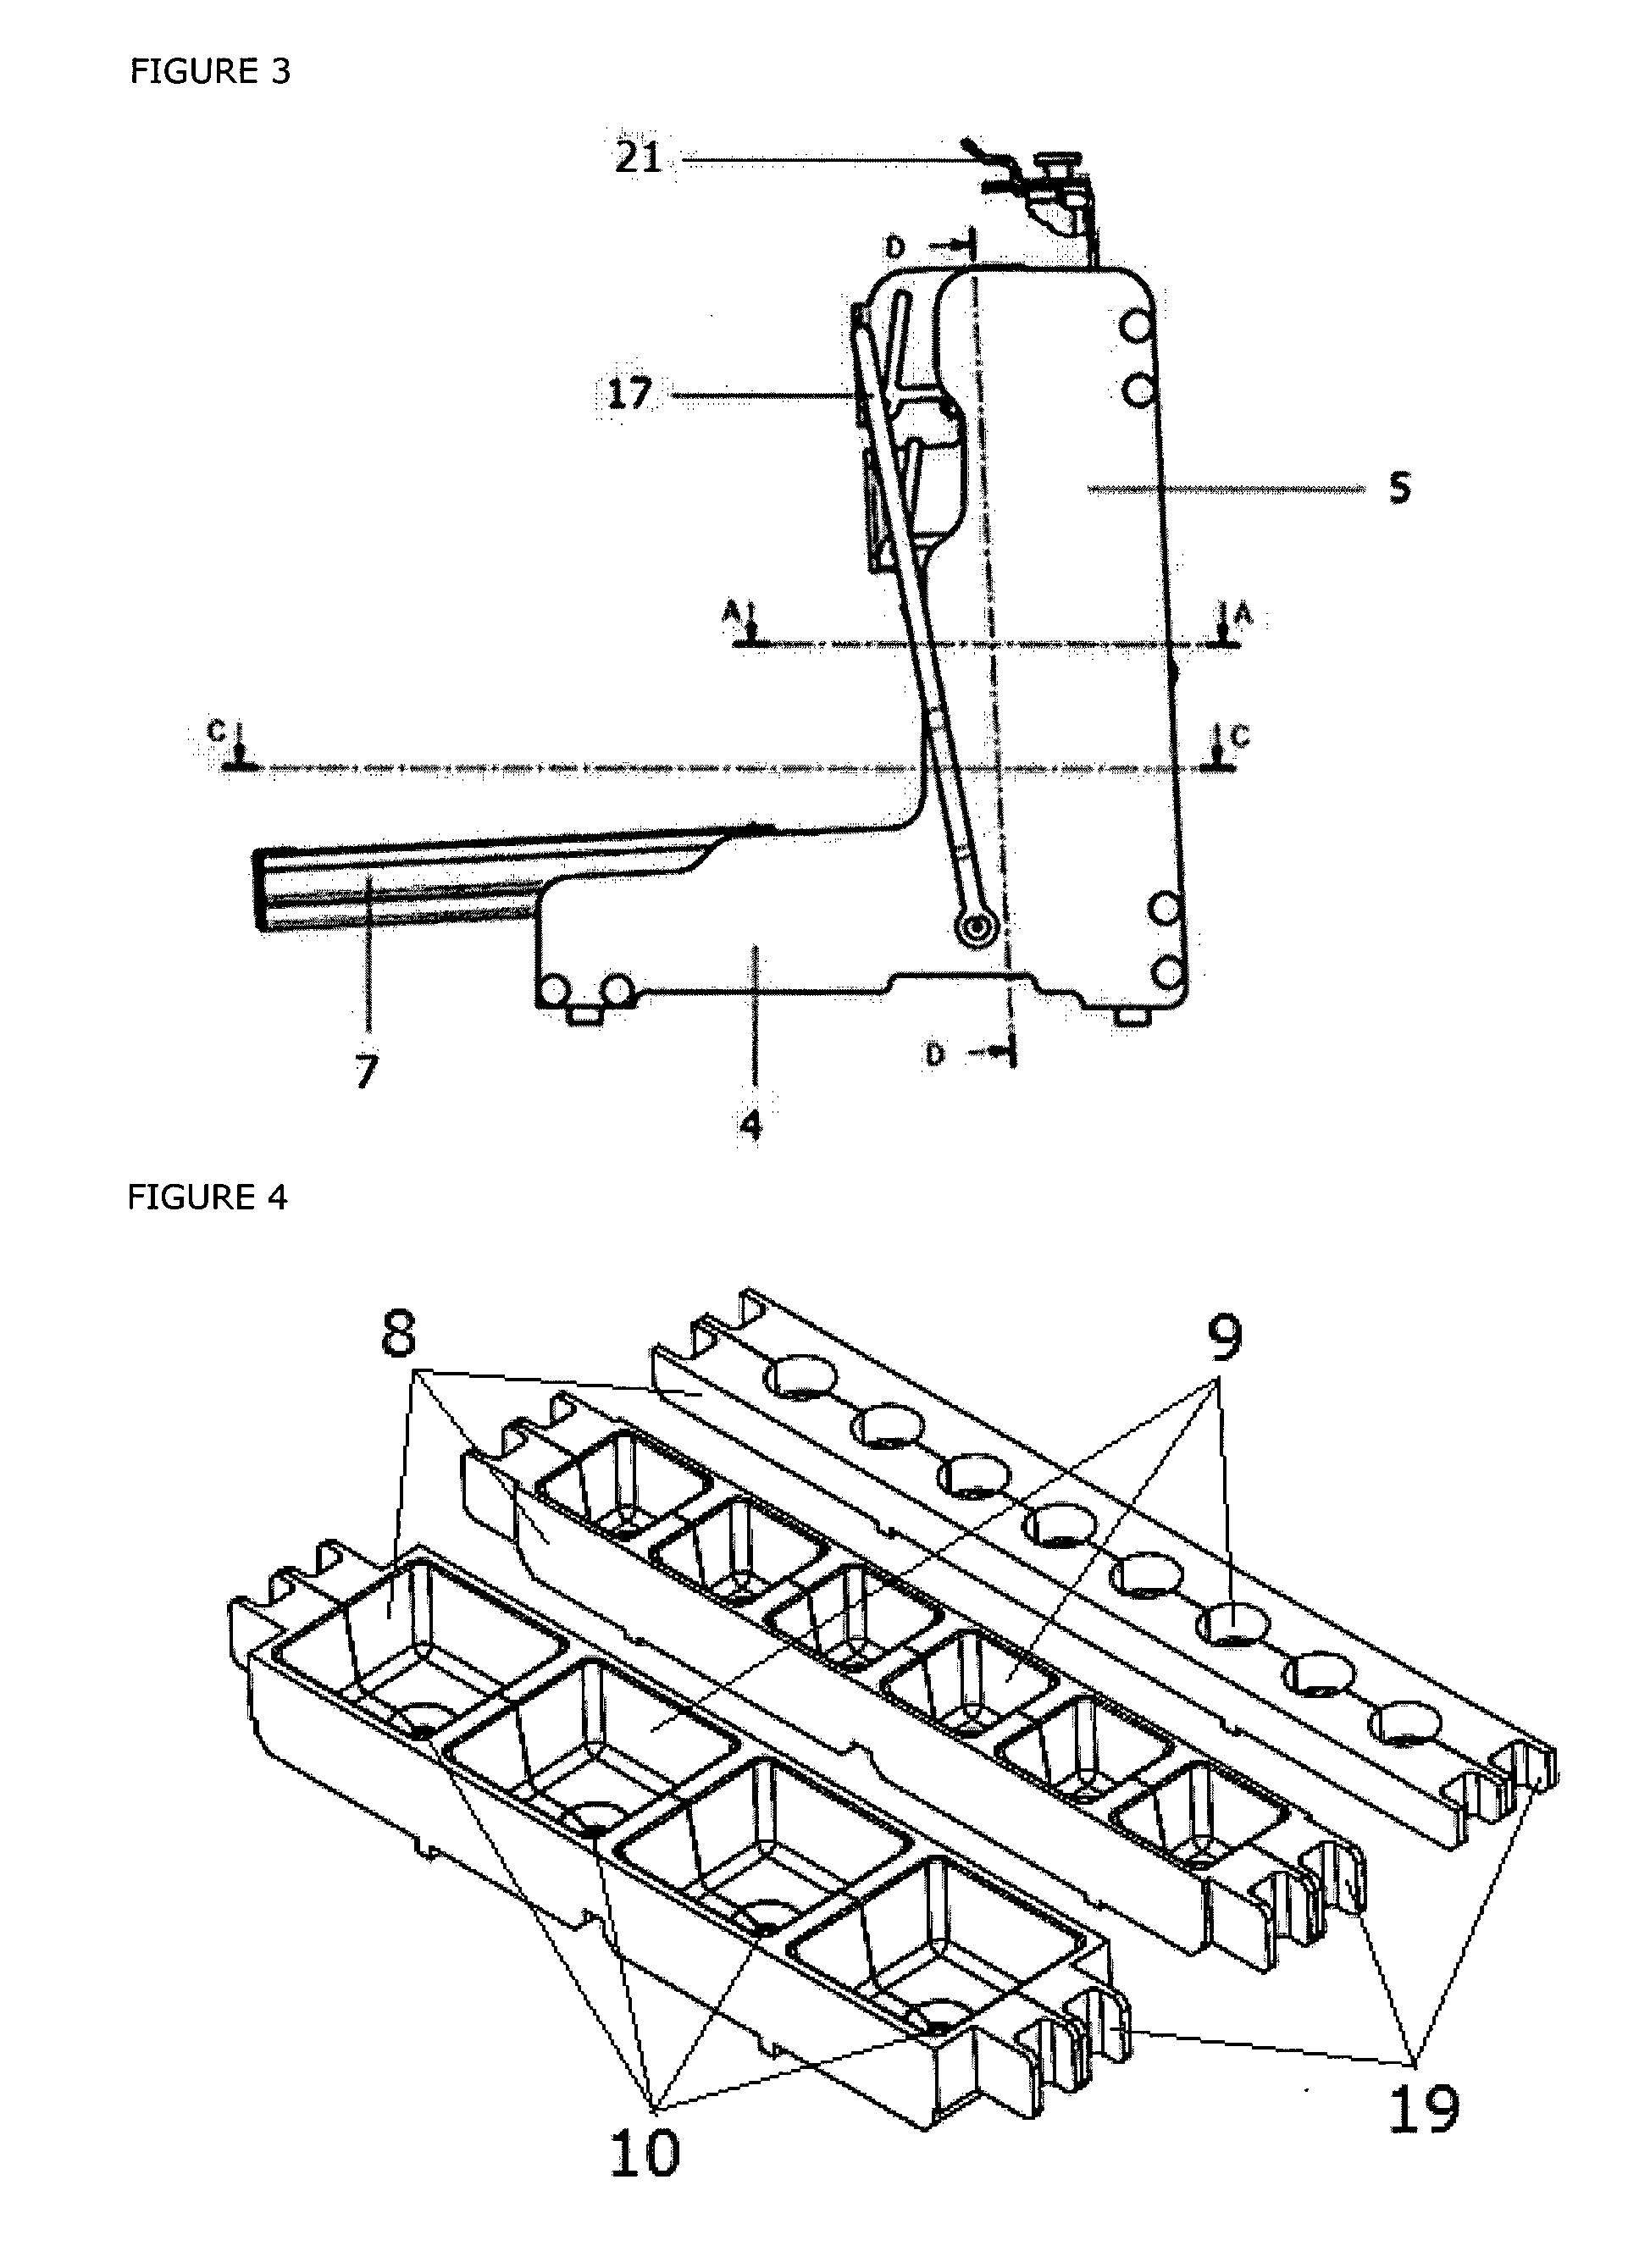 Device and method for composing satays